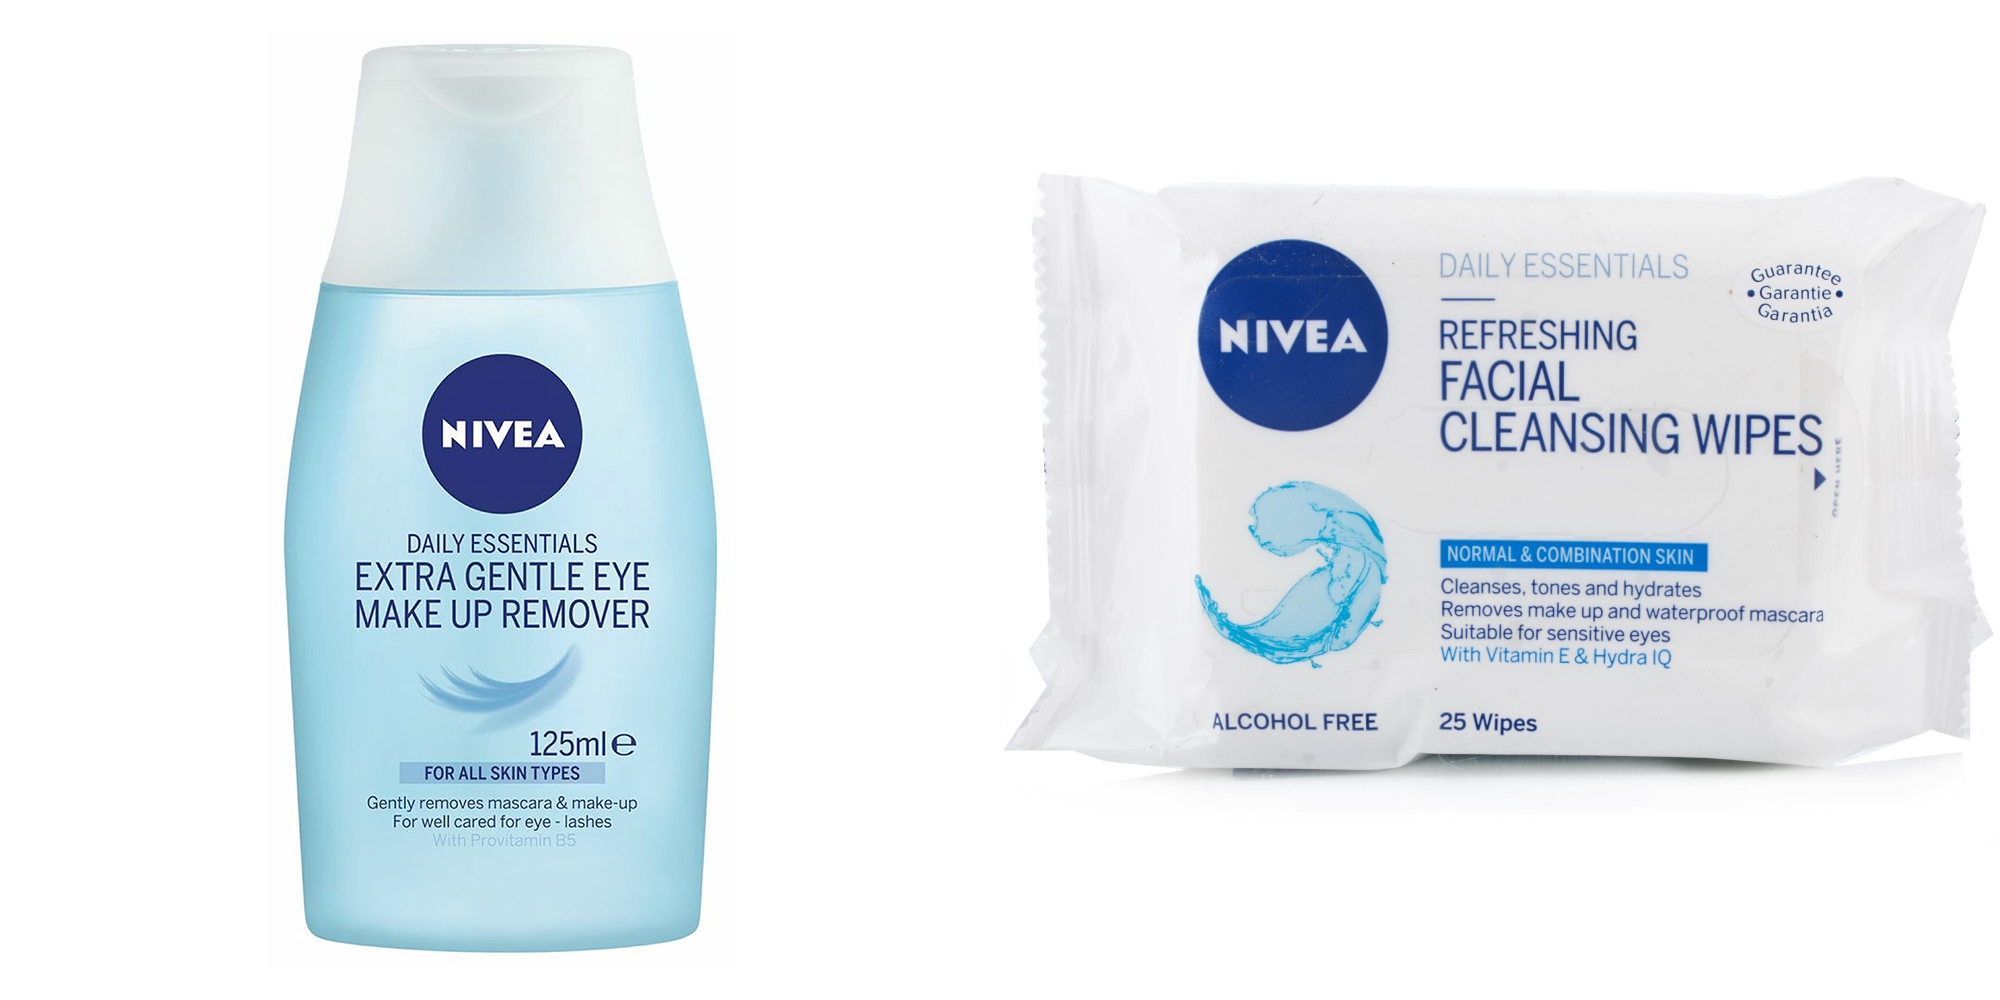 nivea-daily-essentials-extra-gentle-eye-make-up-remover-side